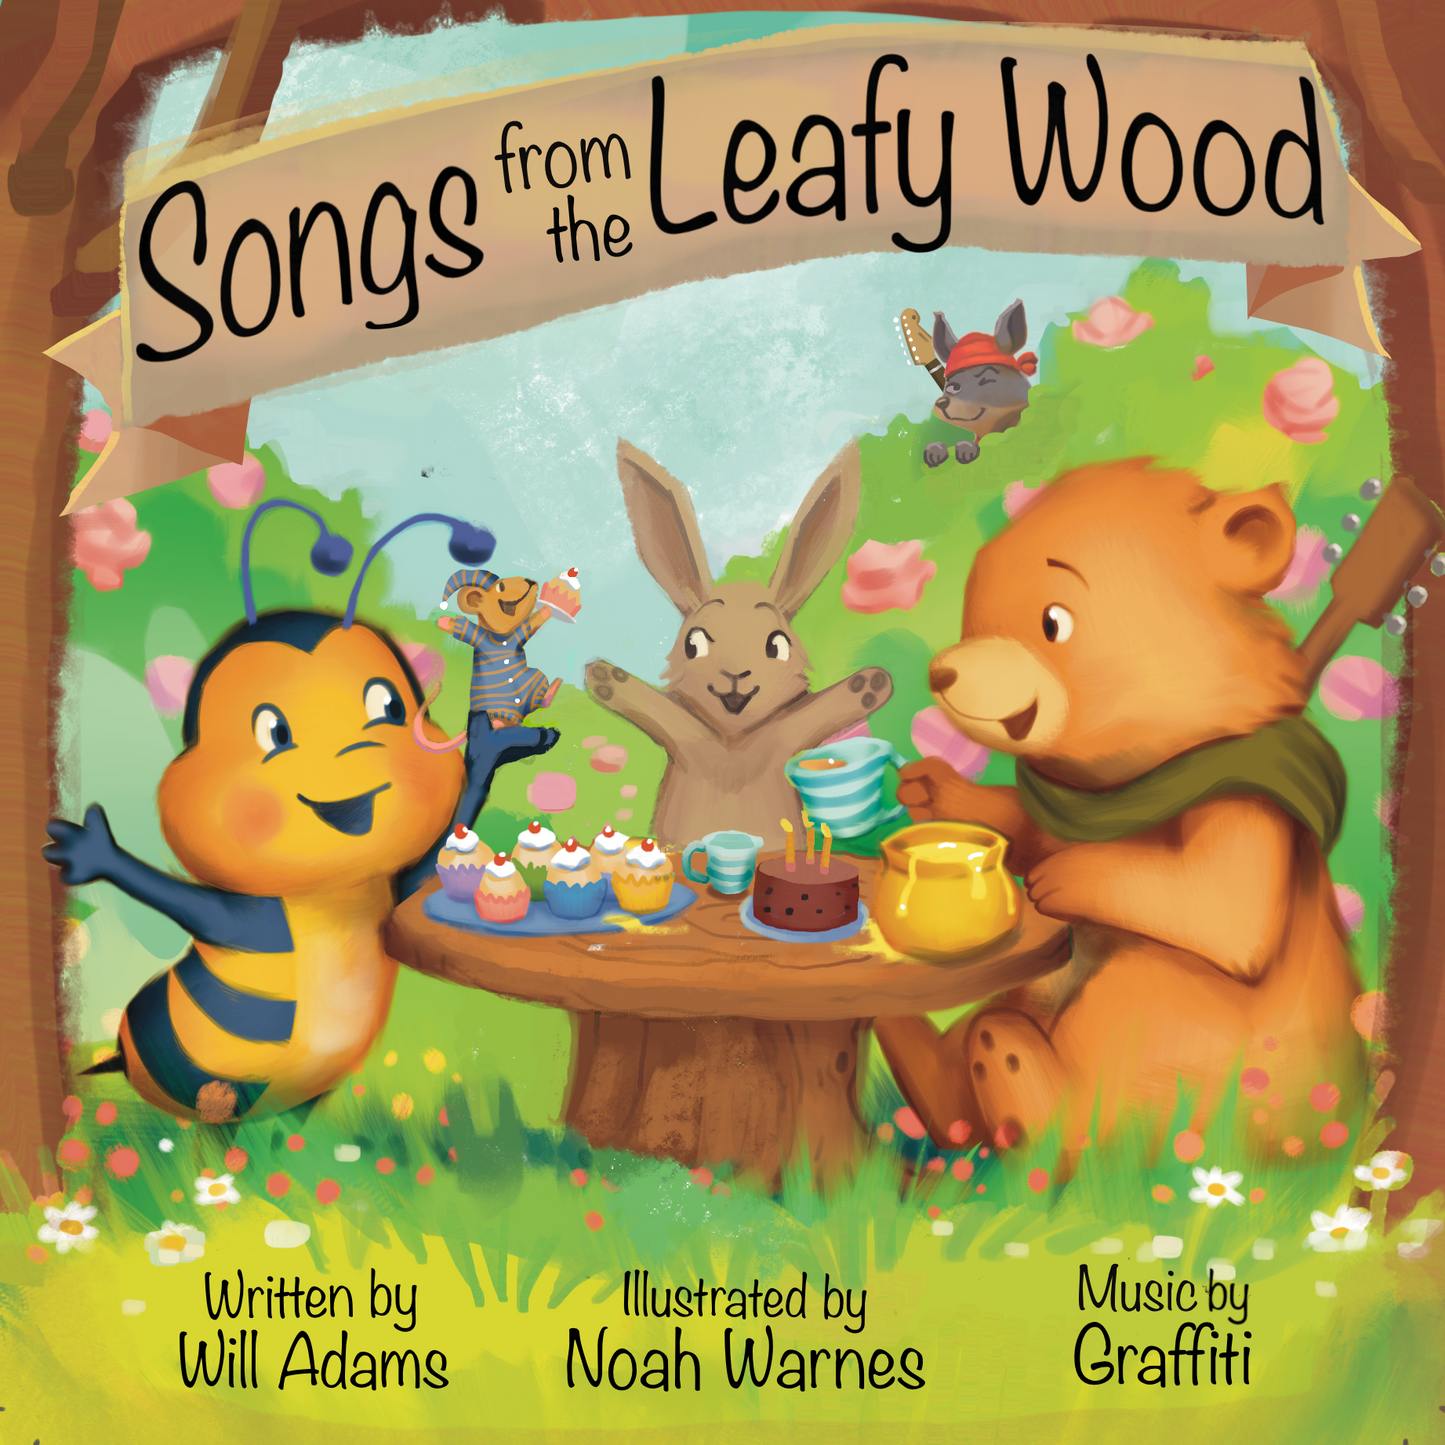 Songs From The Leafy Wood CD Album Songs and Audio Book